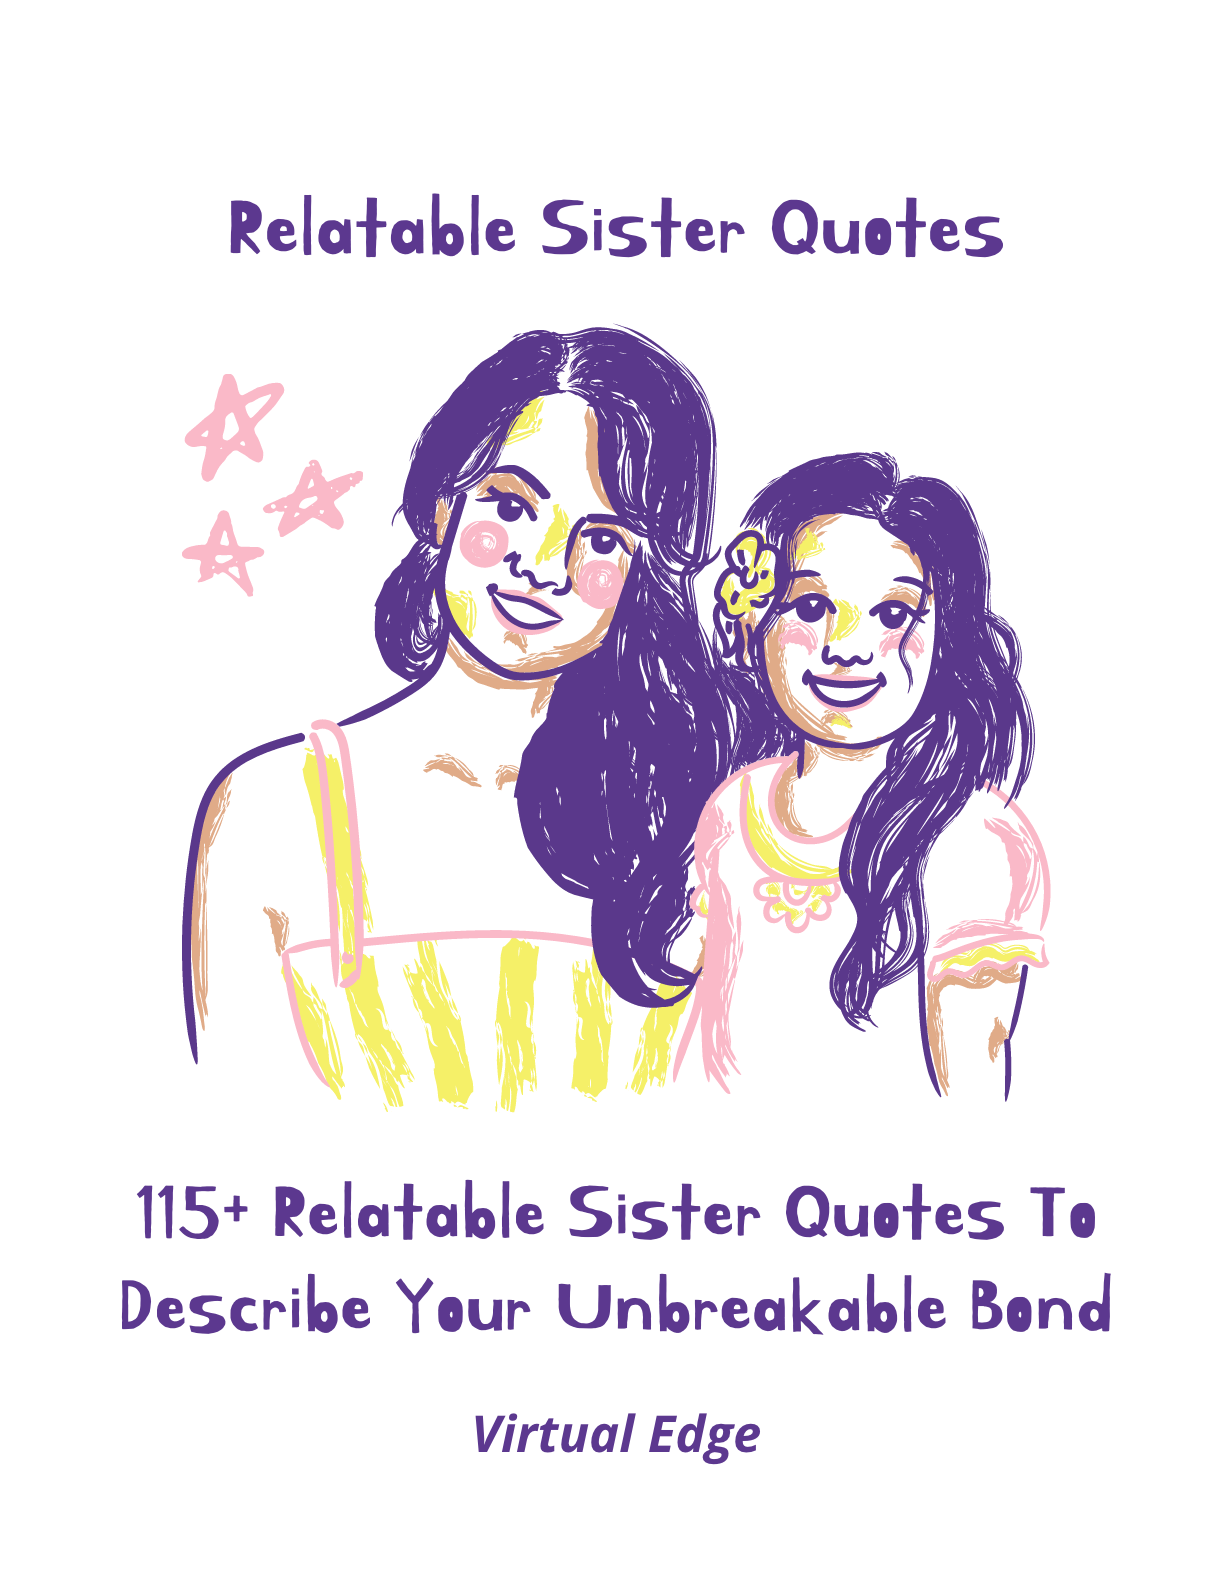 quotes about siblings bond